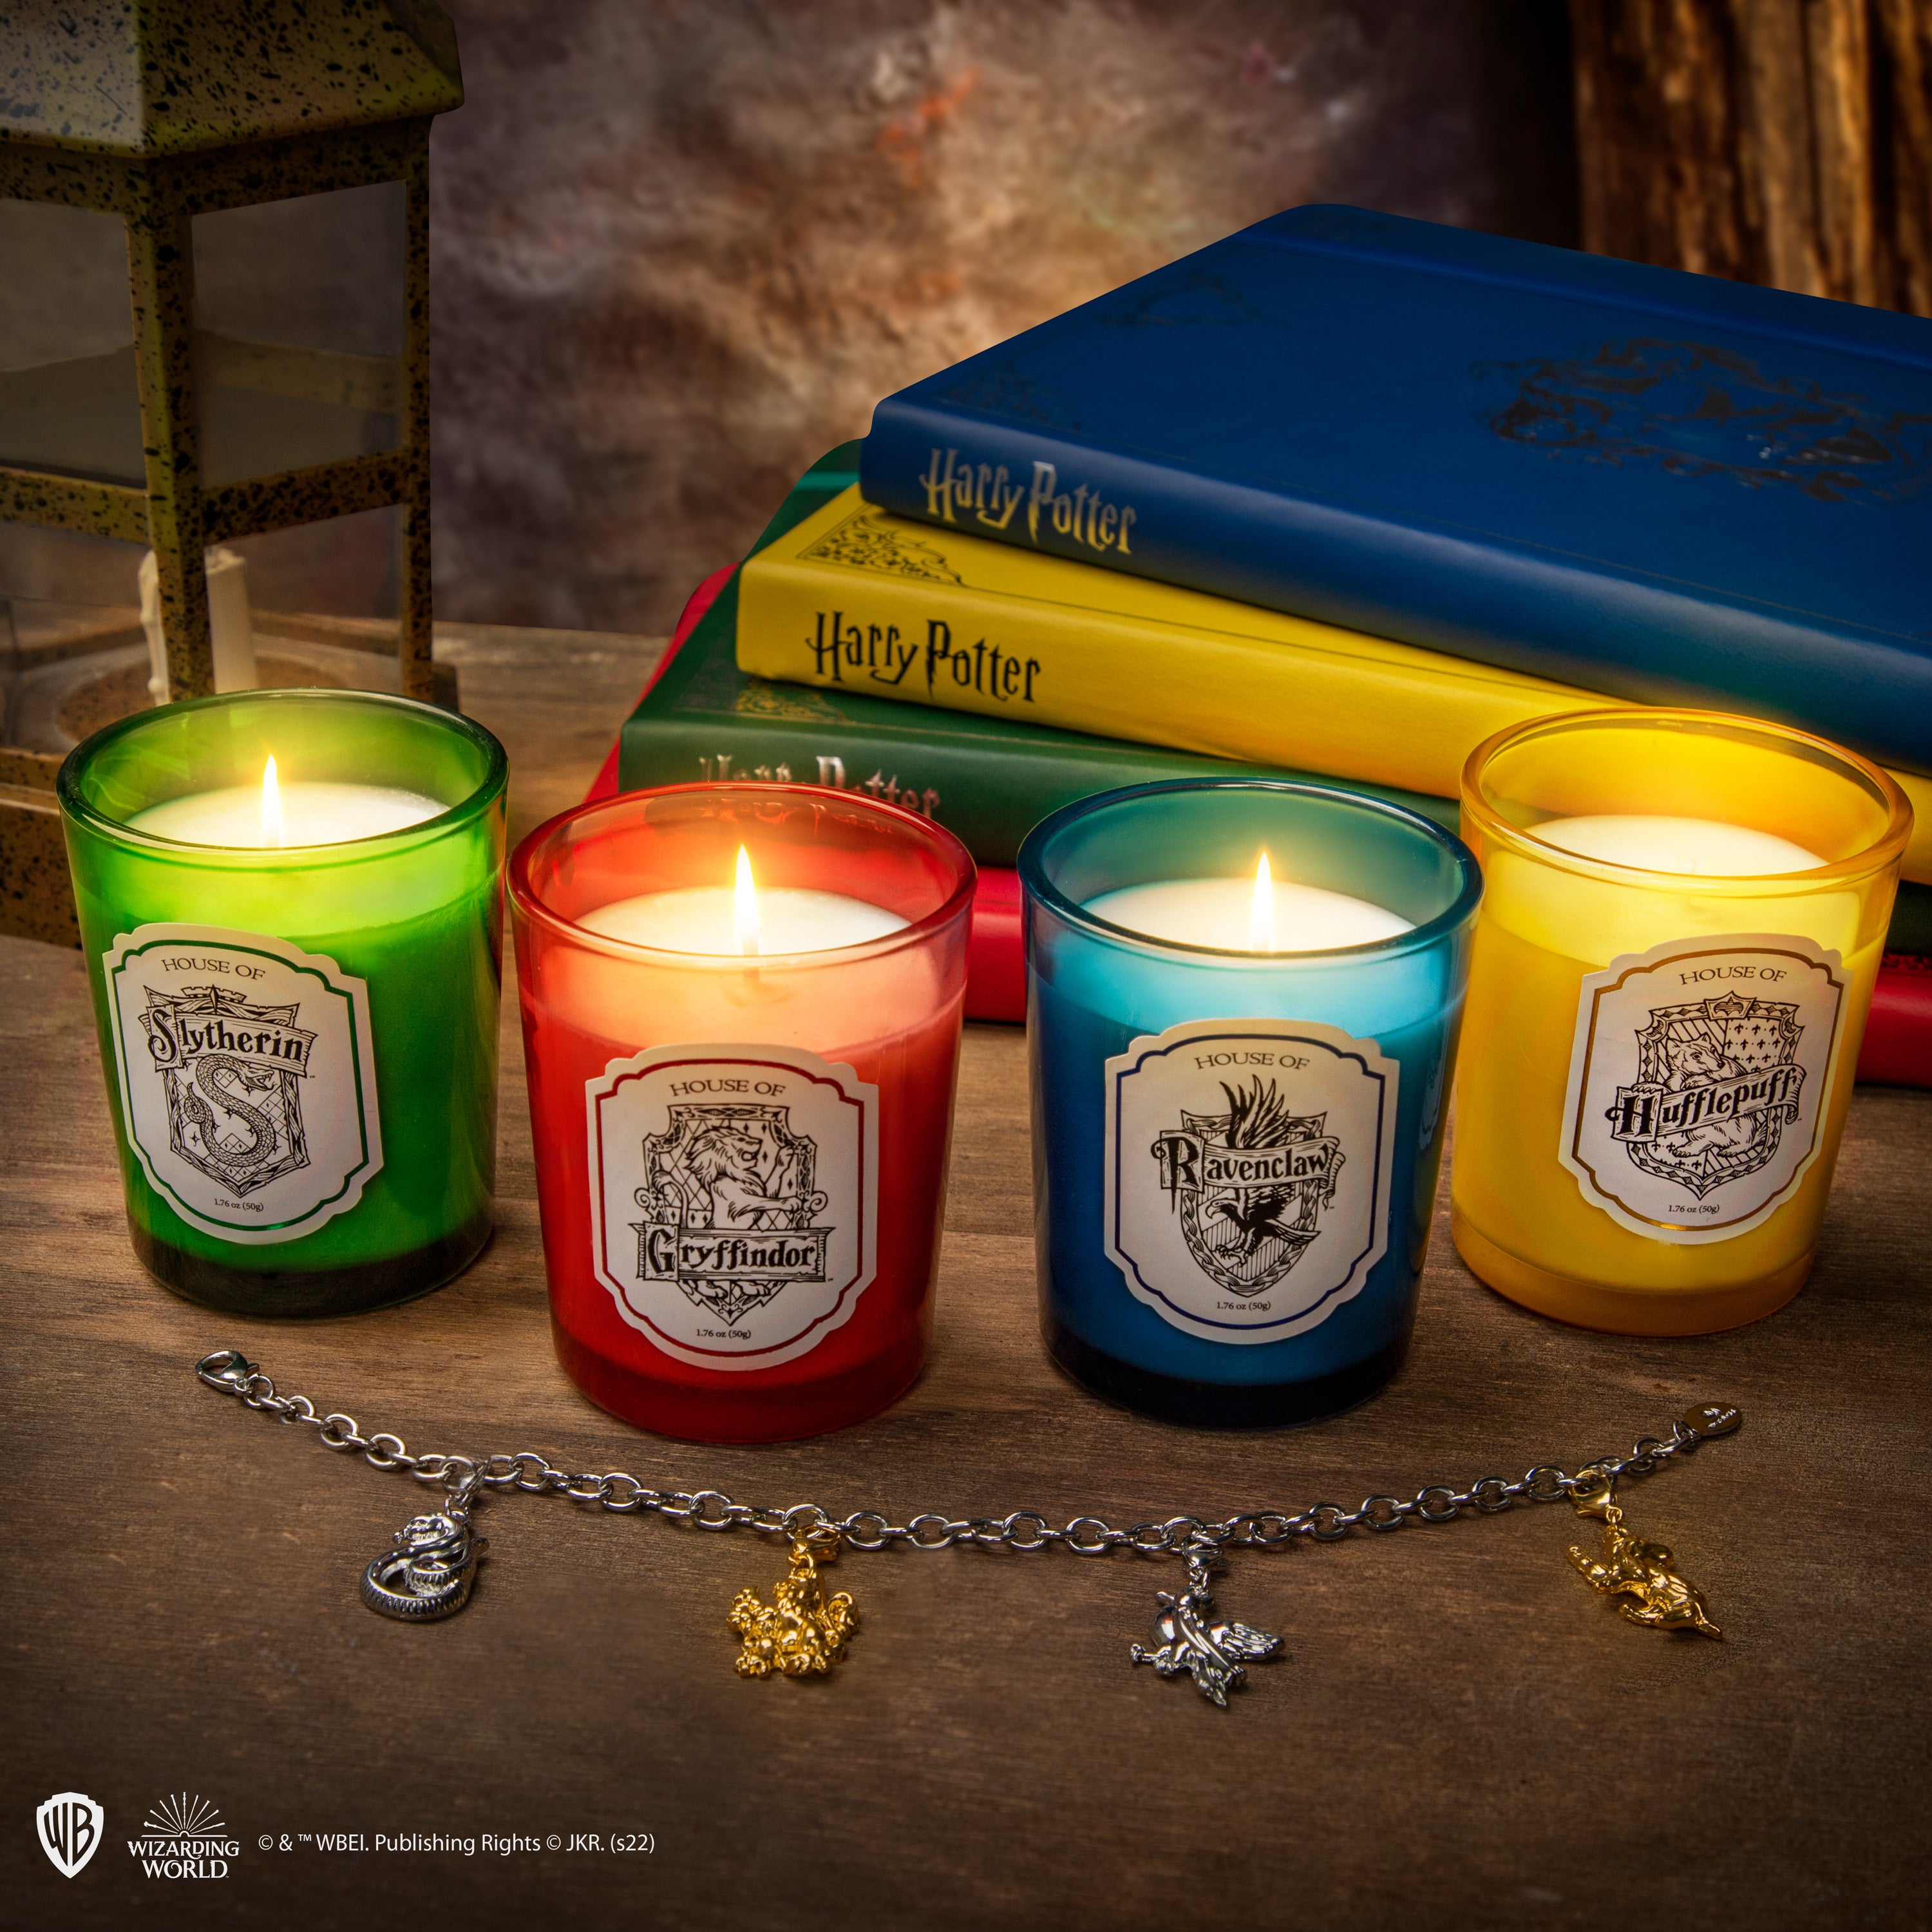 4 Hogwarts Houses Candles With Charm Bracelet, Harry Potter